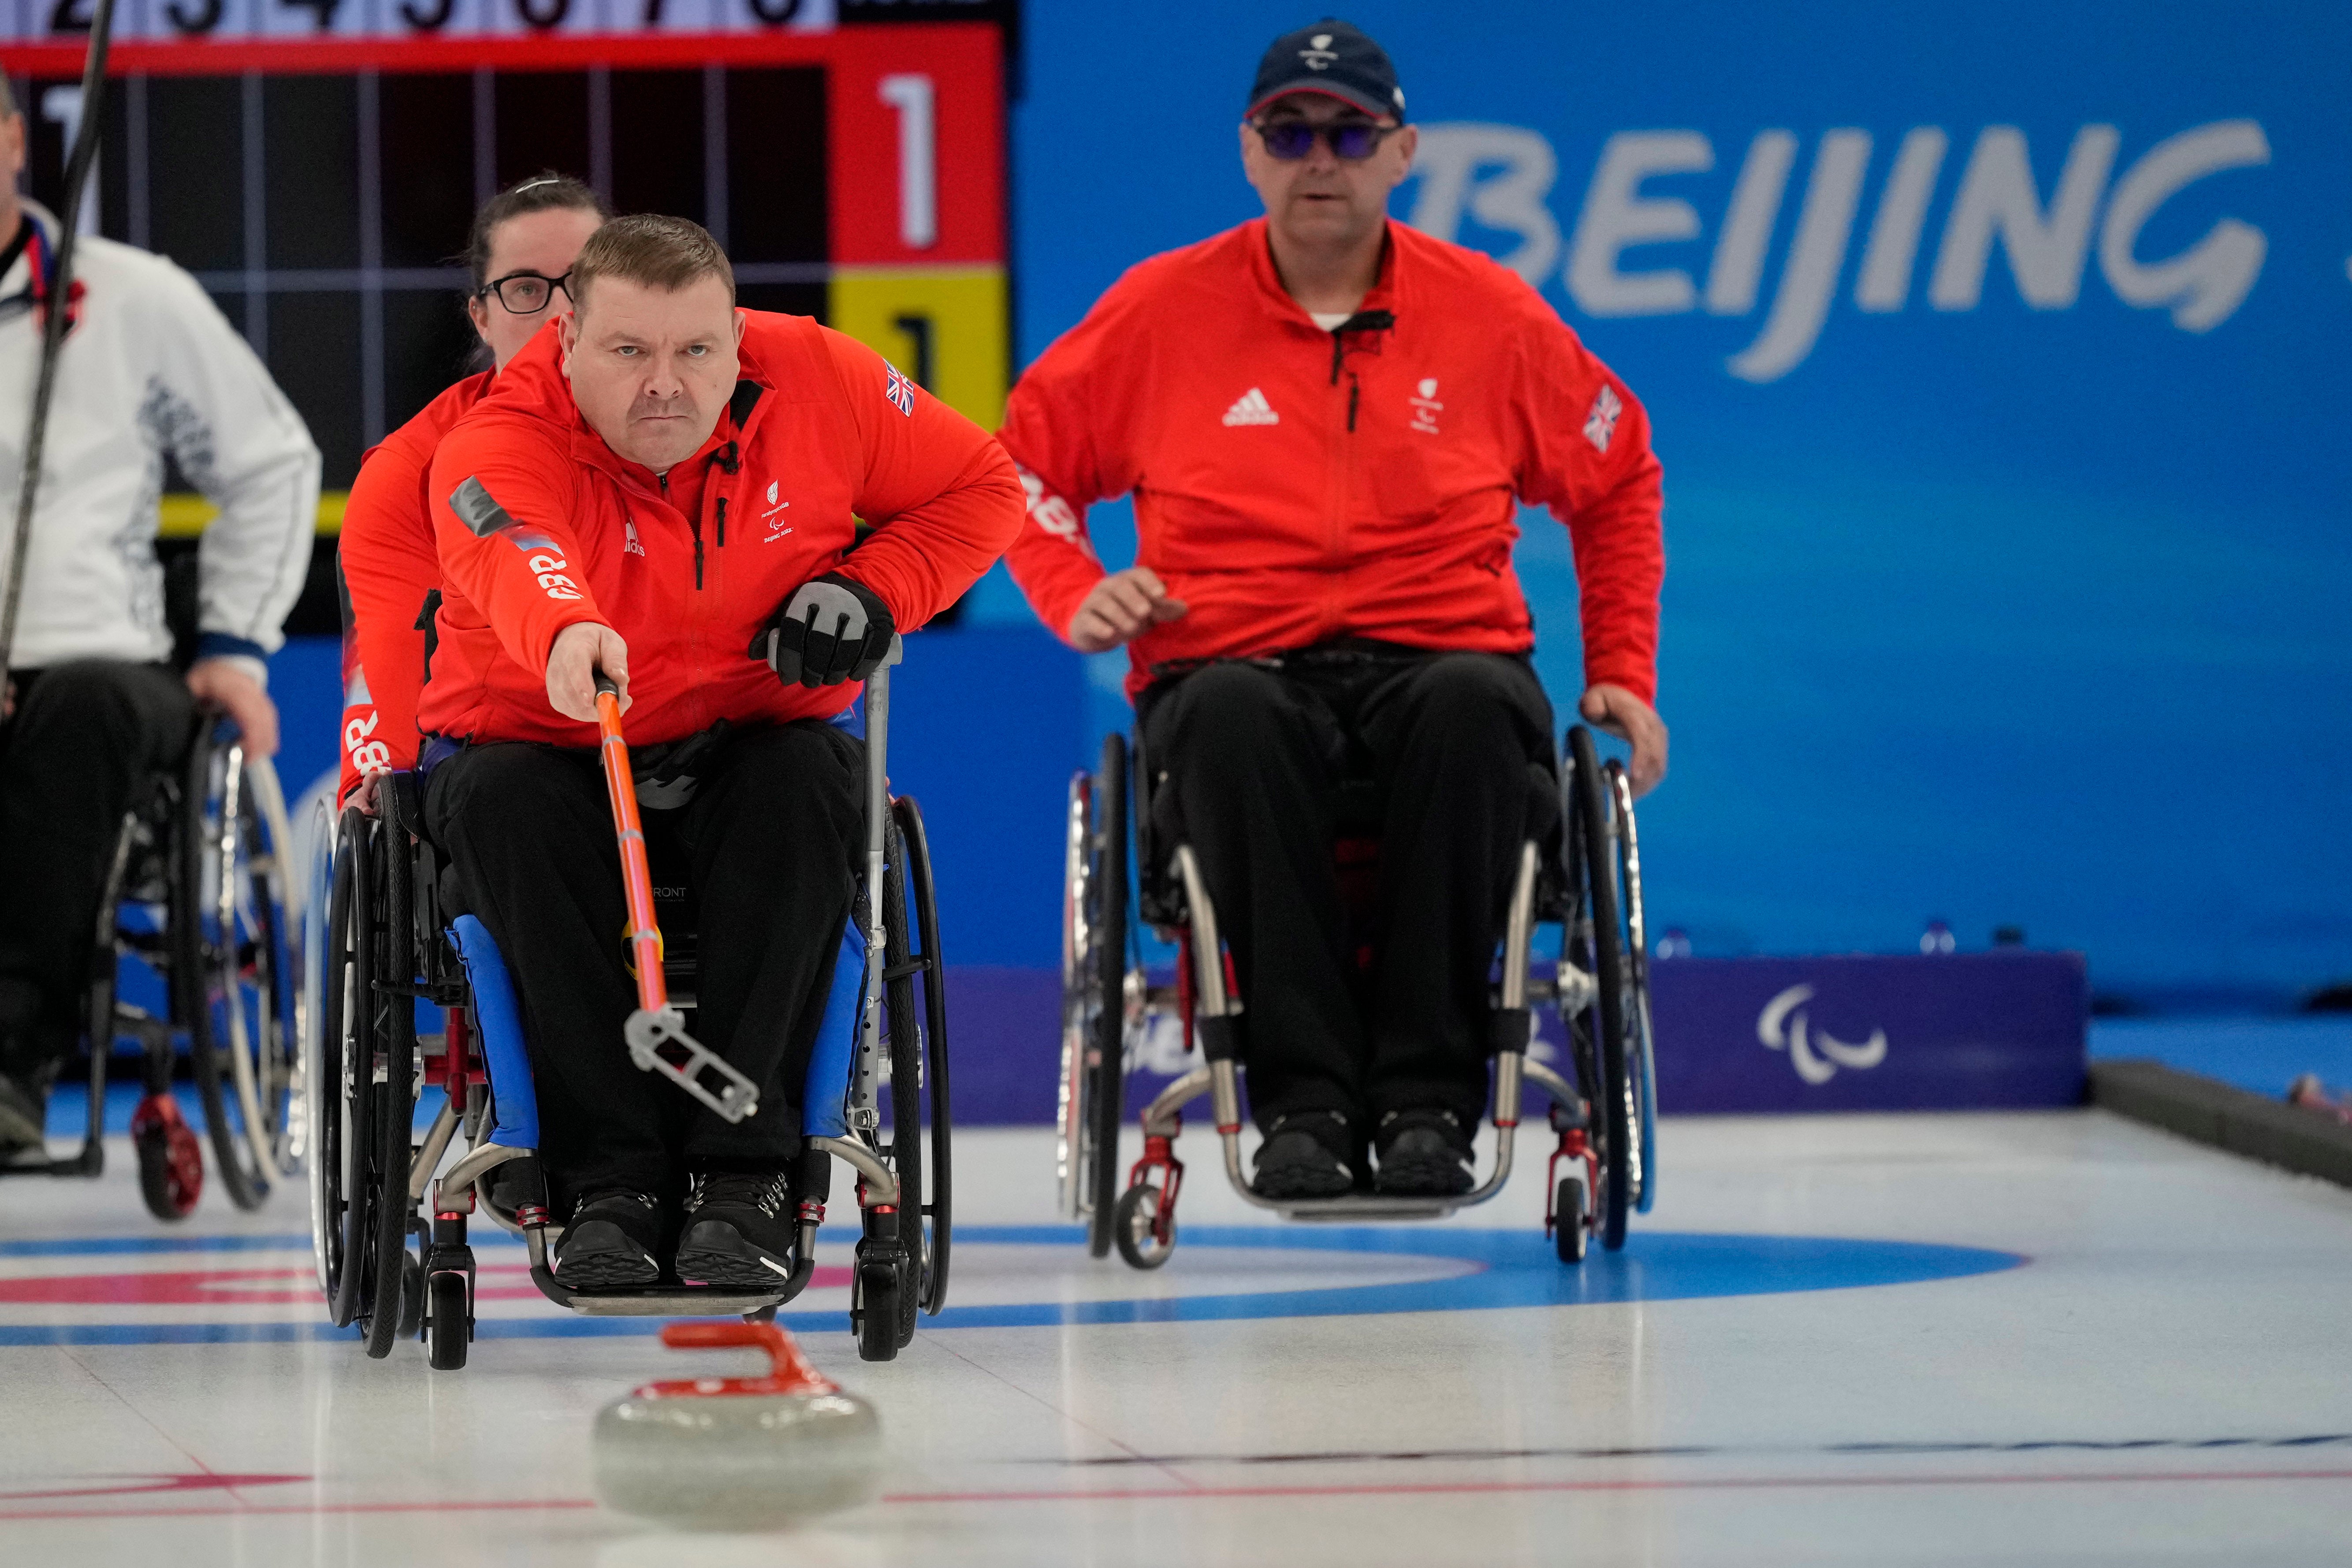 Great Britain have dropped to seventh in the wheelchair curling standings